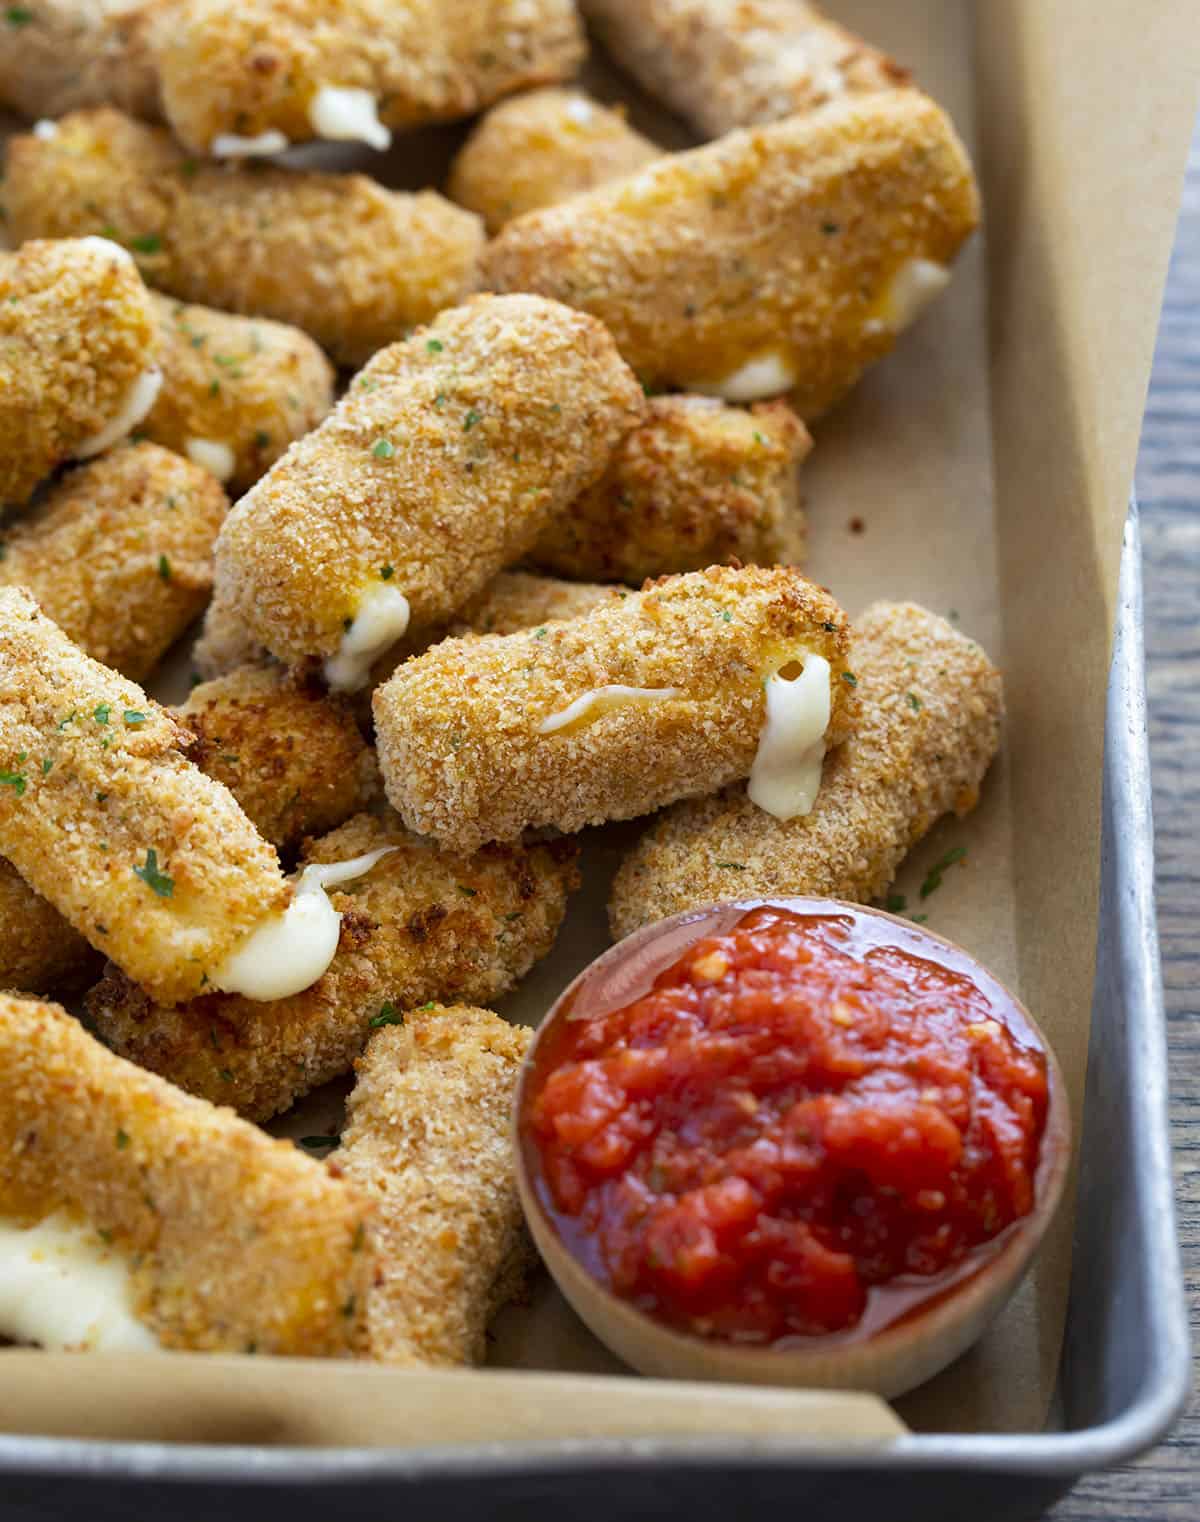 Mozzarella Sticks in a Pan with Marinara Sauce. Appetizers, Cheese Sticks, How to Make Cheese Sticks, How to Make Mozzarella Sticks, Superbowl Food, Football Appetizers, Easy Appetizers, Air Fryer Appetizers, Hot Appetizers, i am homesteader, iamhomesteader